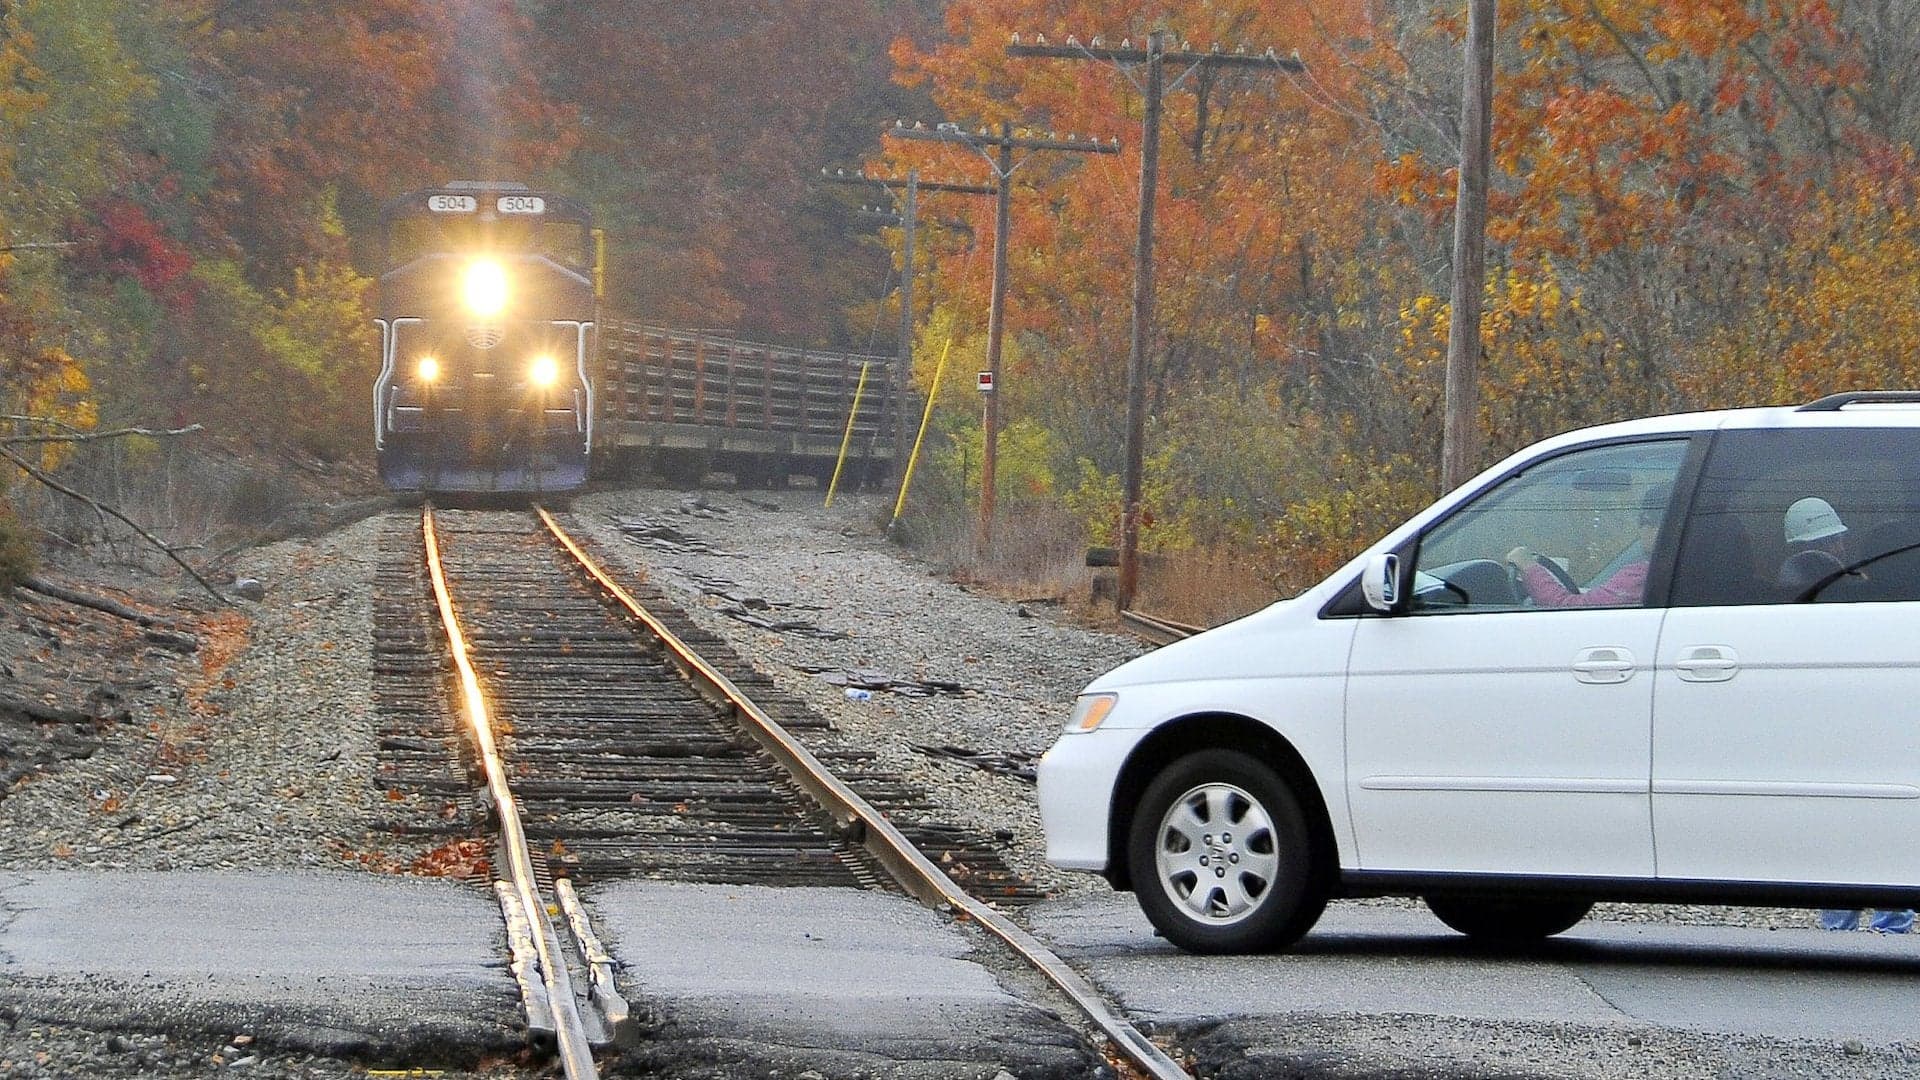 Cop, Brave Citizens Pull 96-Year-Old Woman From Car Seconds Before Train Hits